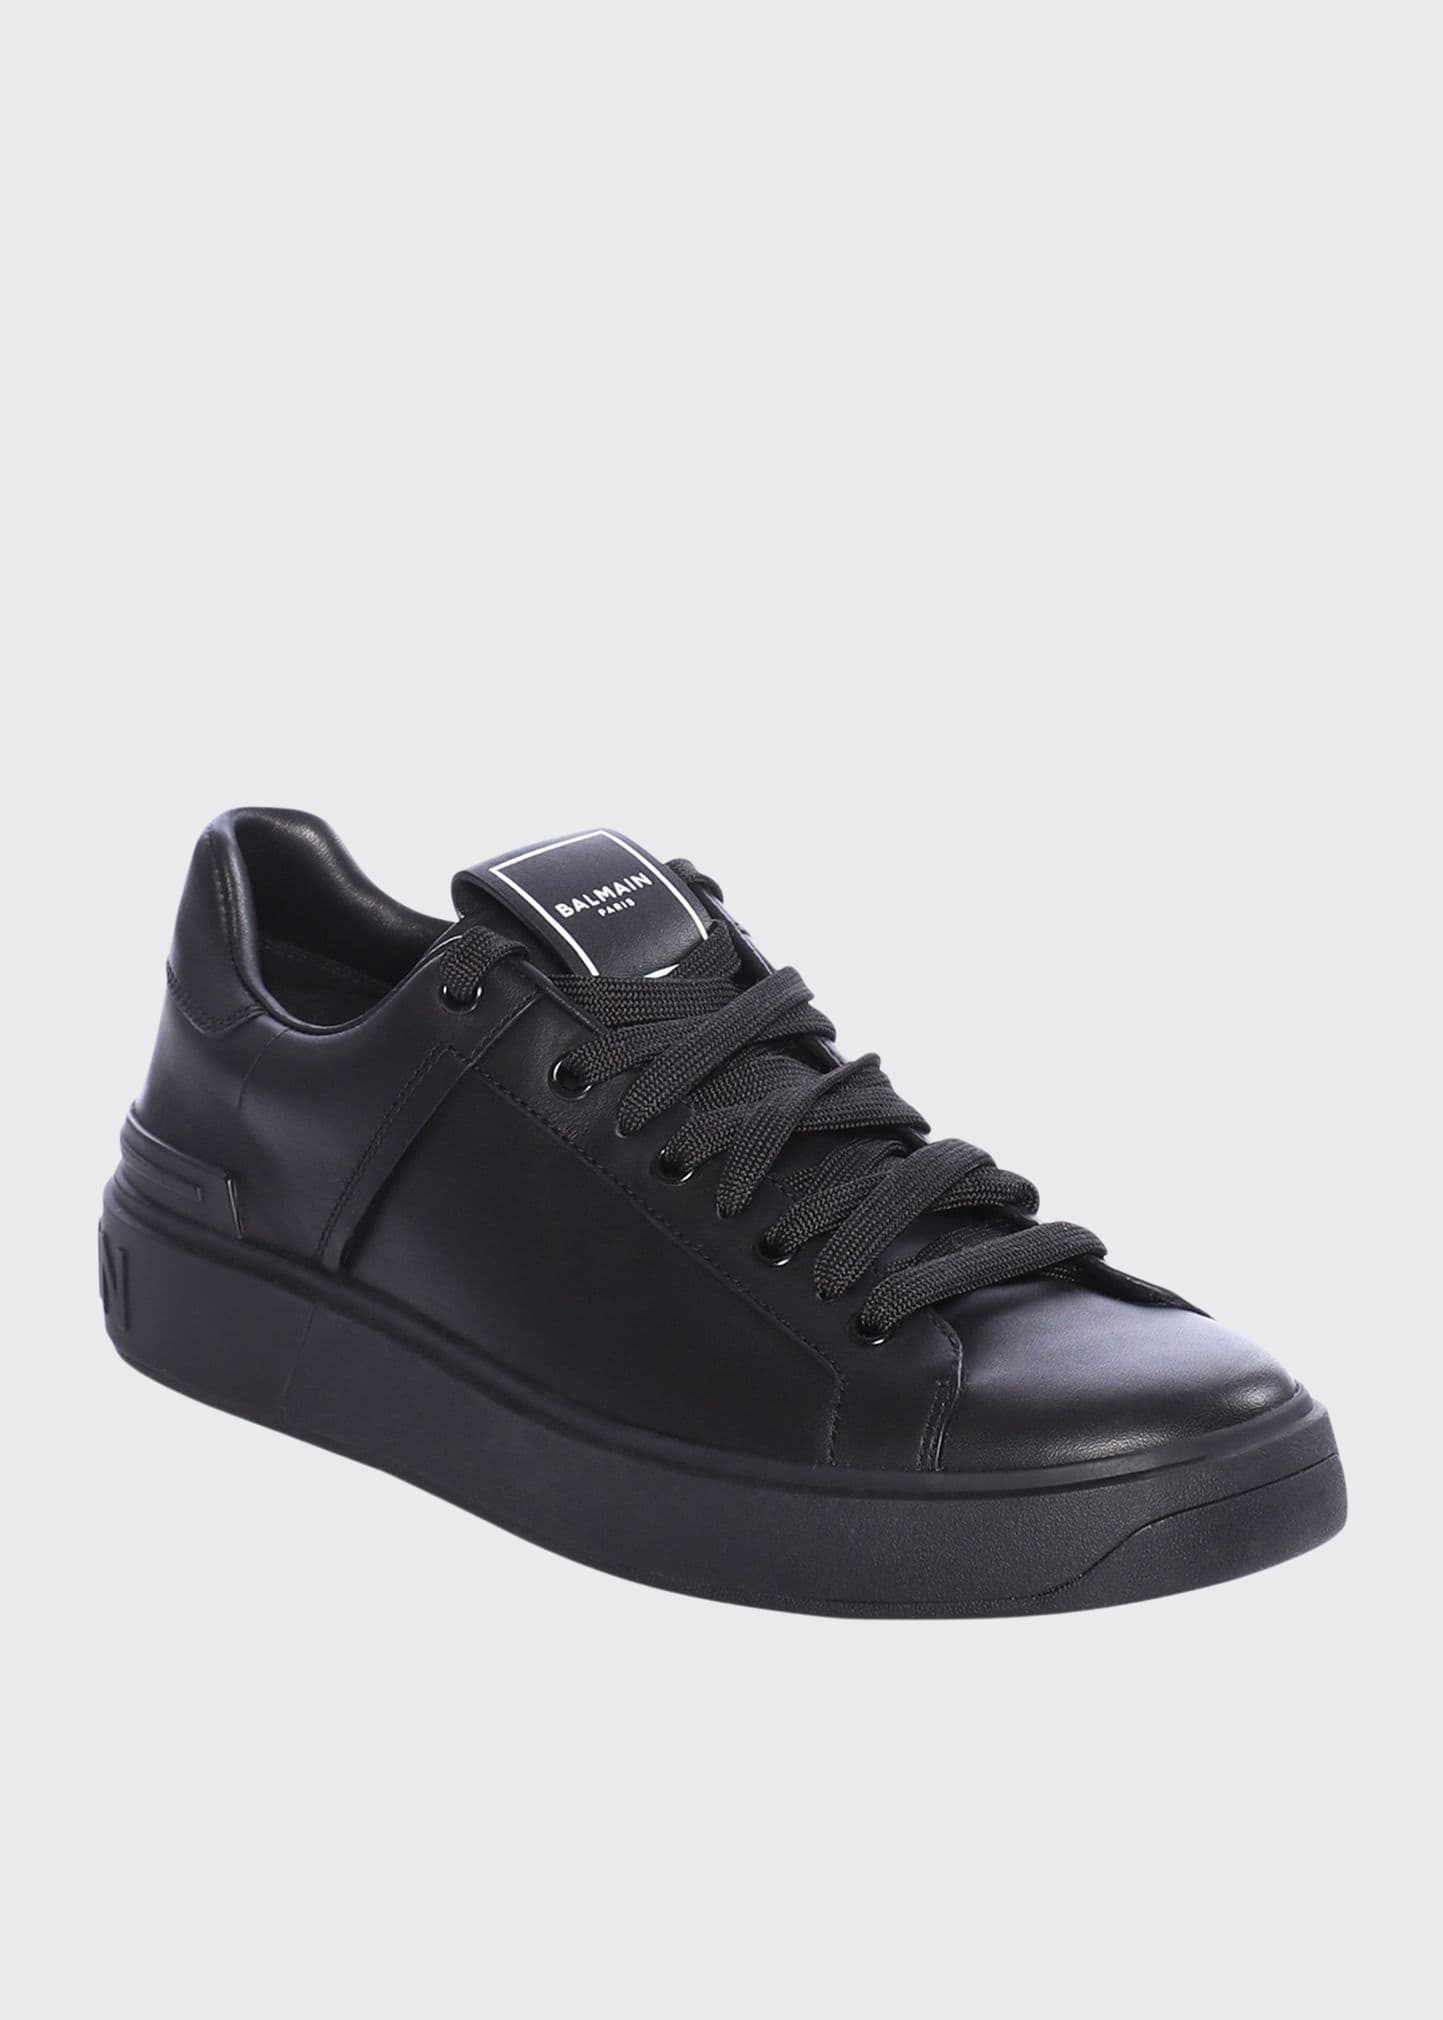 Leather, neoprene and suede B-Bold low-top sneakers black - Men